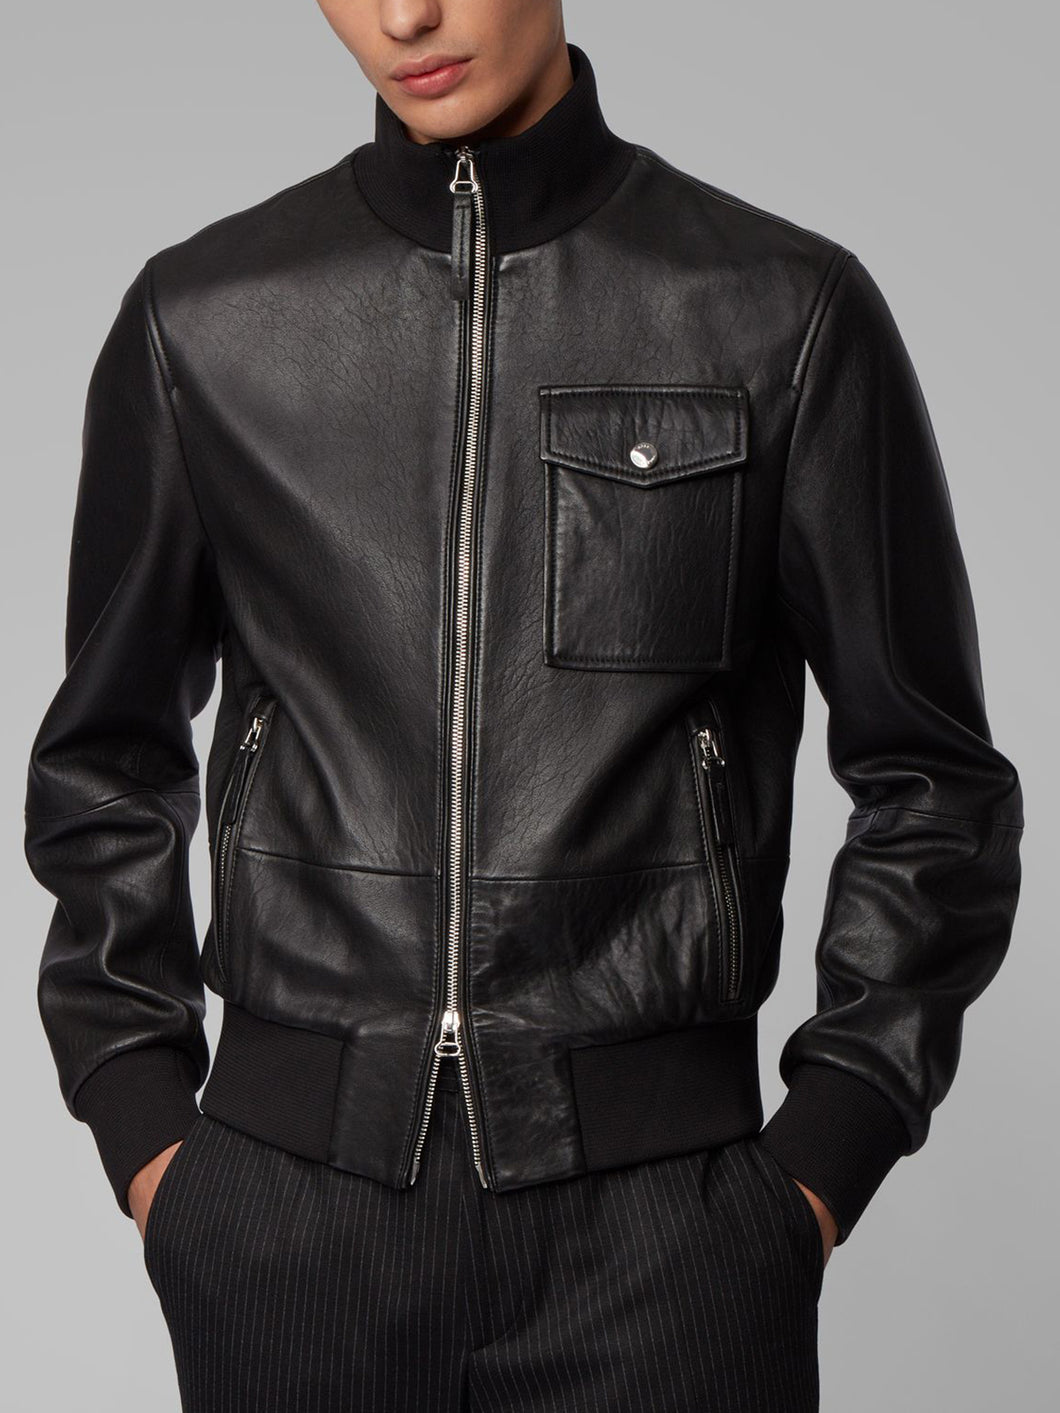 Real Lambskin Black Leather Jacket - Snap Collar Cafe Racer Style